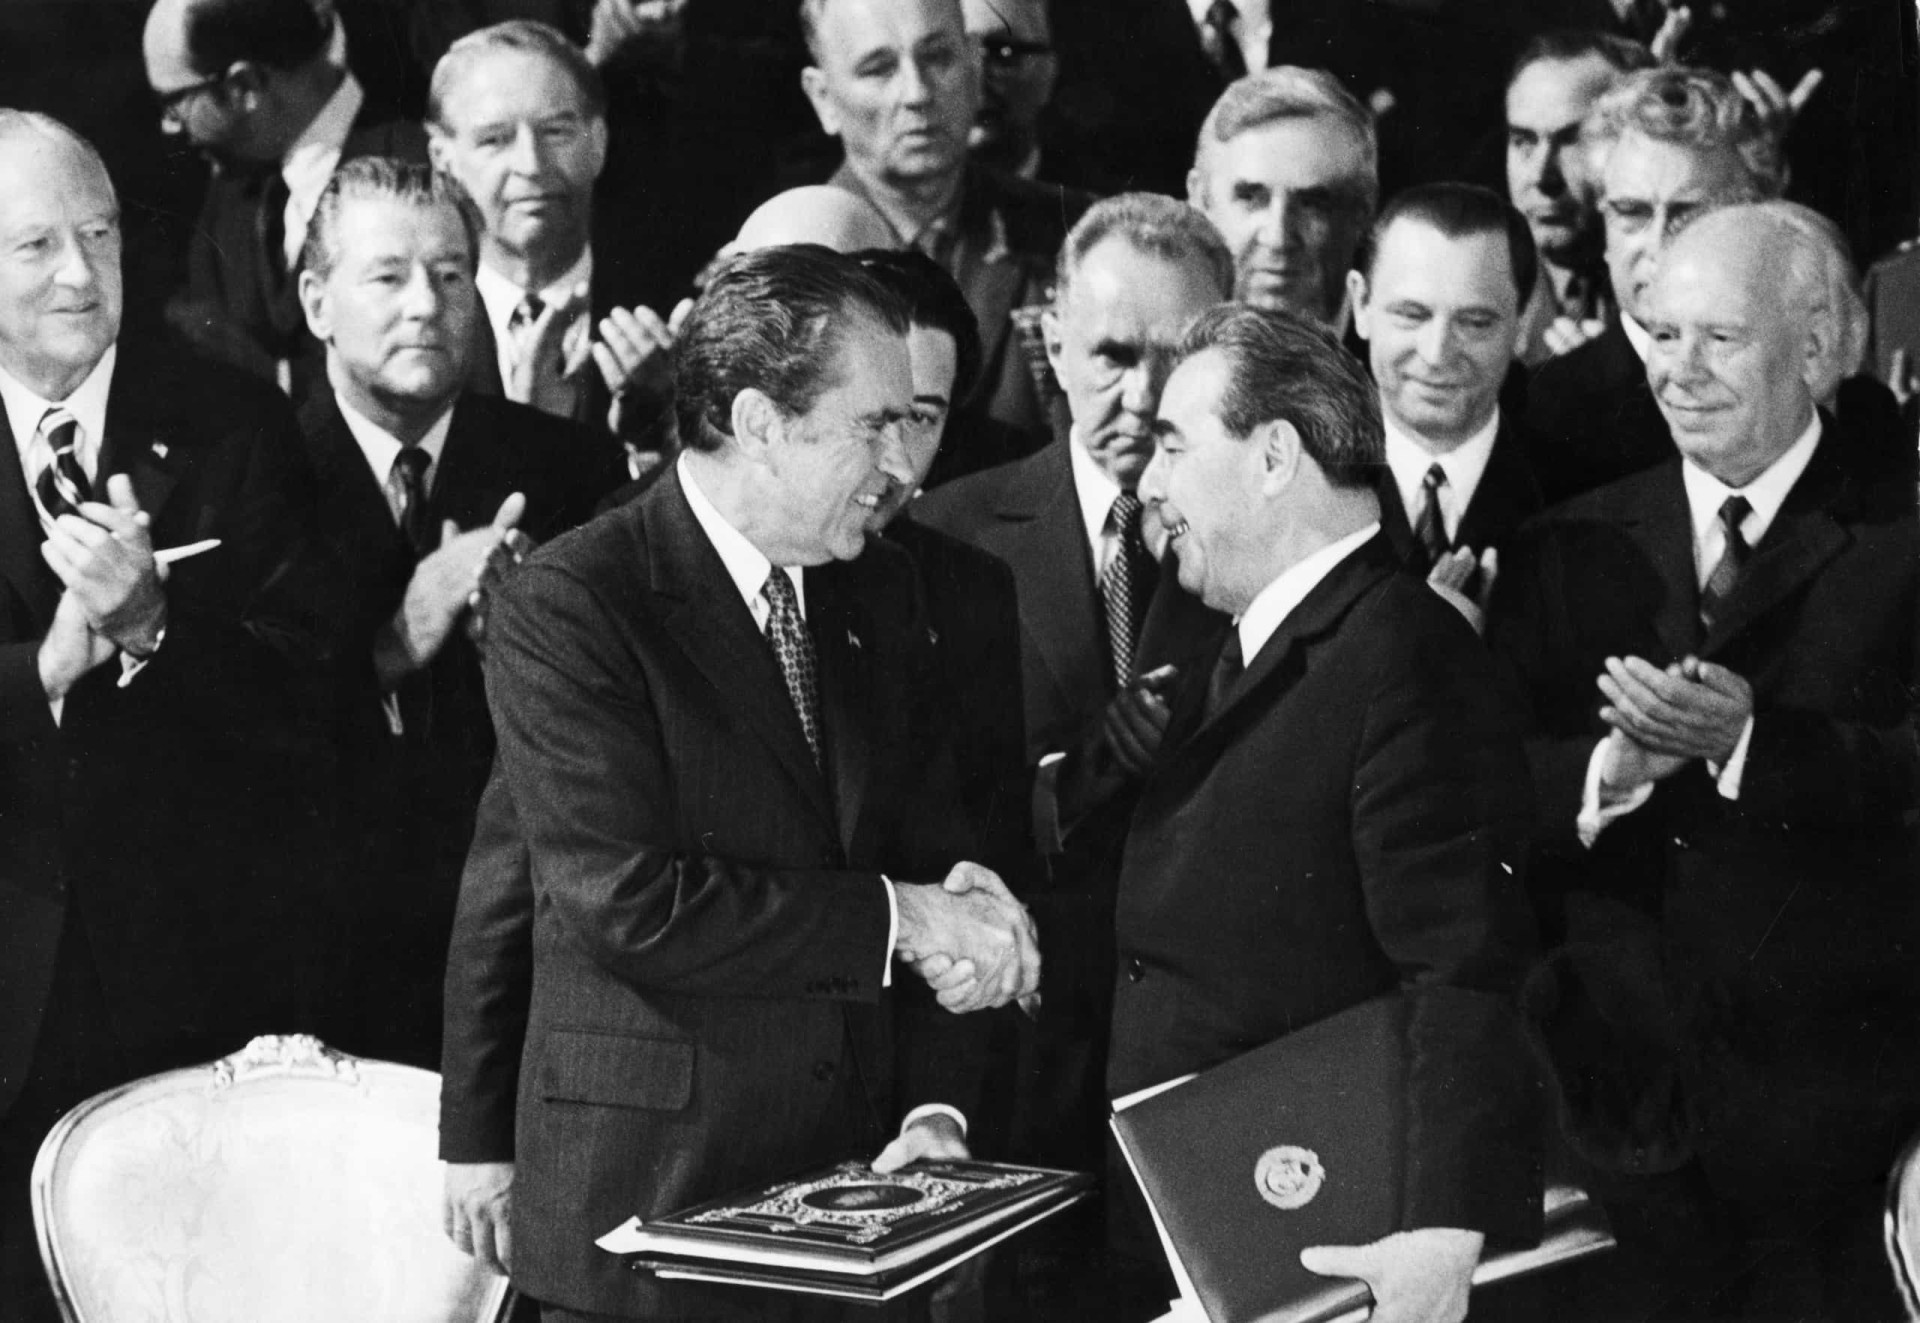 <p>A wave of renewed optimism sweeps the world as the United States and the Soviet Union sign the first Strategic Arms Limitation Treaty (SALT I) and the Anti-Ballistic Missile (ABM) Treaty. The clock drops back 120 seconds to 12 minutes before midnight as Richard Nixon and Leonid Brezhnev close the deal in Moscow.</p><p><a href="https://www.msn.com/en-us/community/channel/vid-7xx8mnucu55yw63we9va2gwr7uihbxwc68fxqp25x6tg4ftibpra?cvid=94631541bc0f4f89bfd59158d696ad7e">Follow us and access great exclusive content every day</a></p>